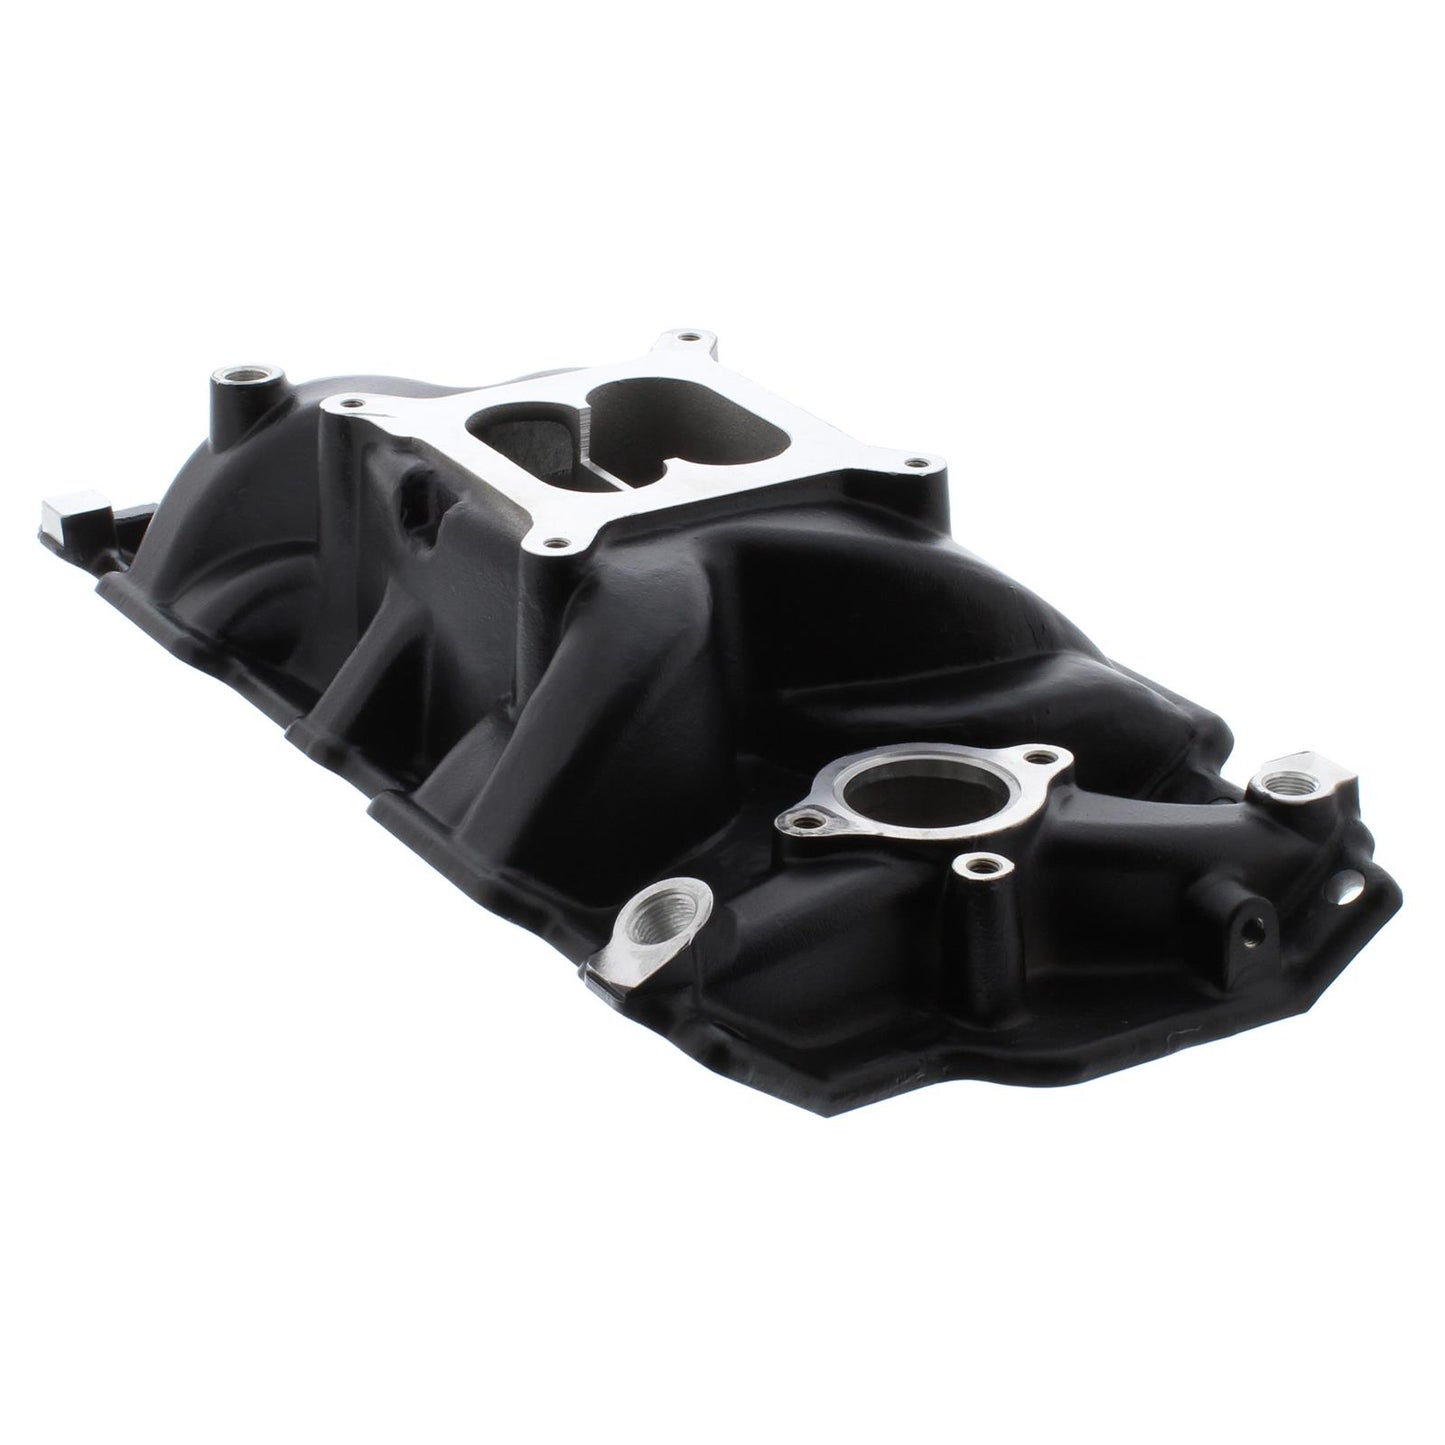 54042 -  SB Chevy Cyclone+Plus Carbureted Intake Manifold BLACK - Professional Products